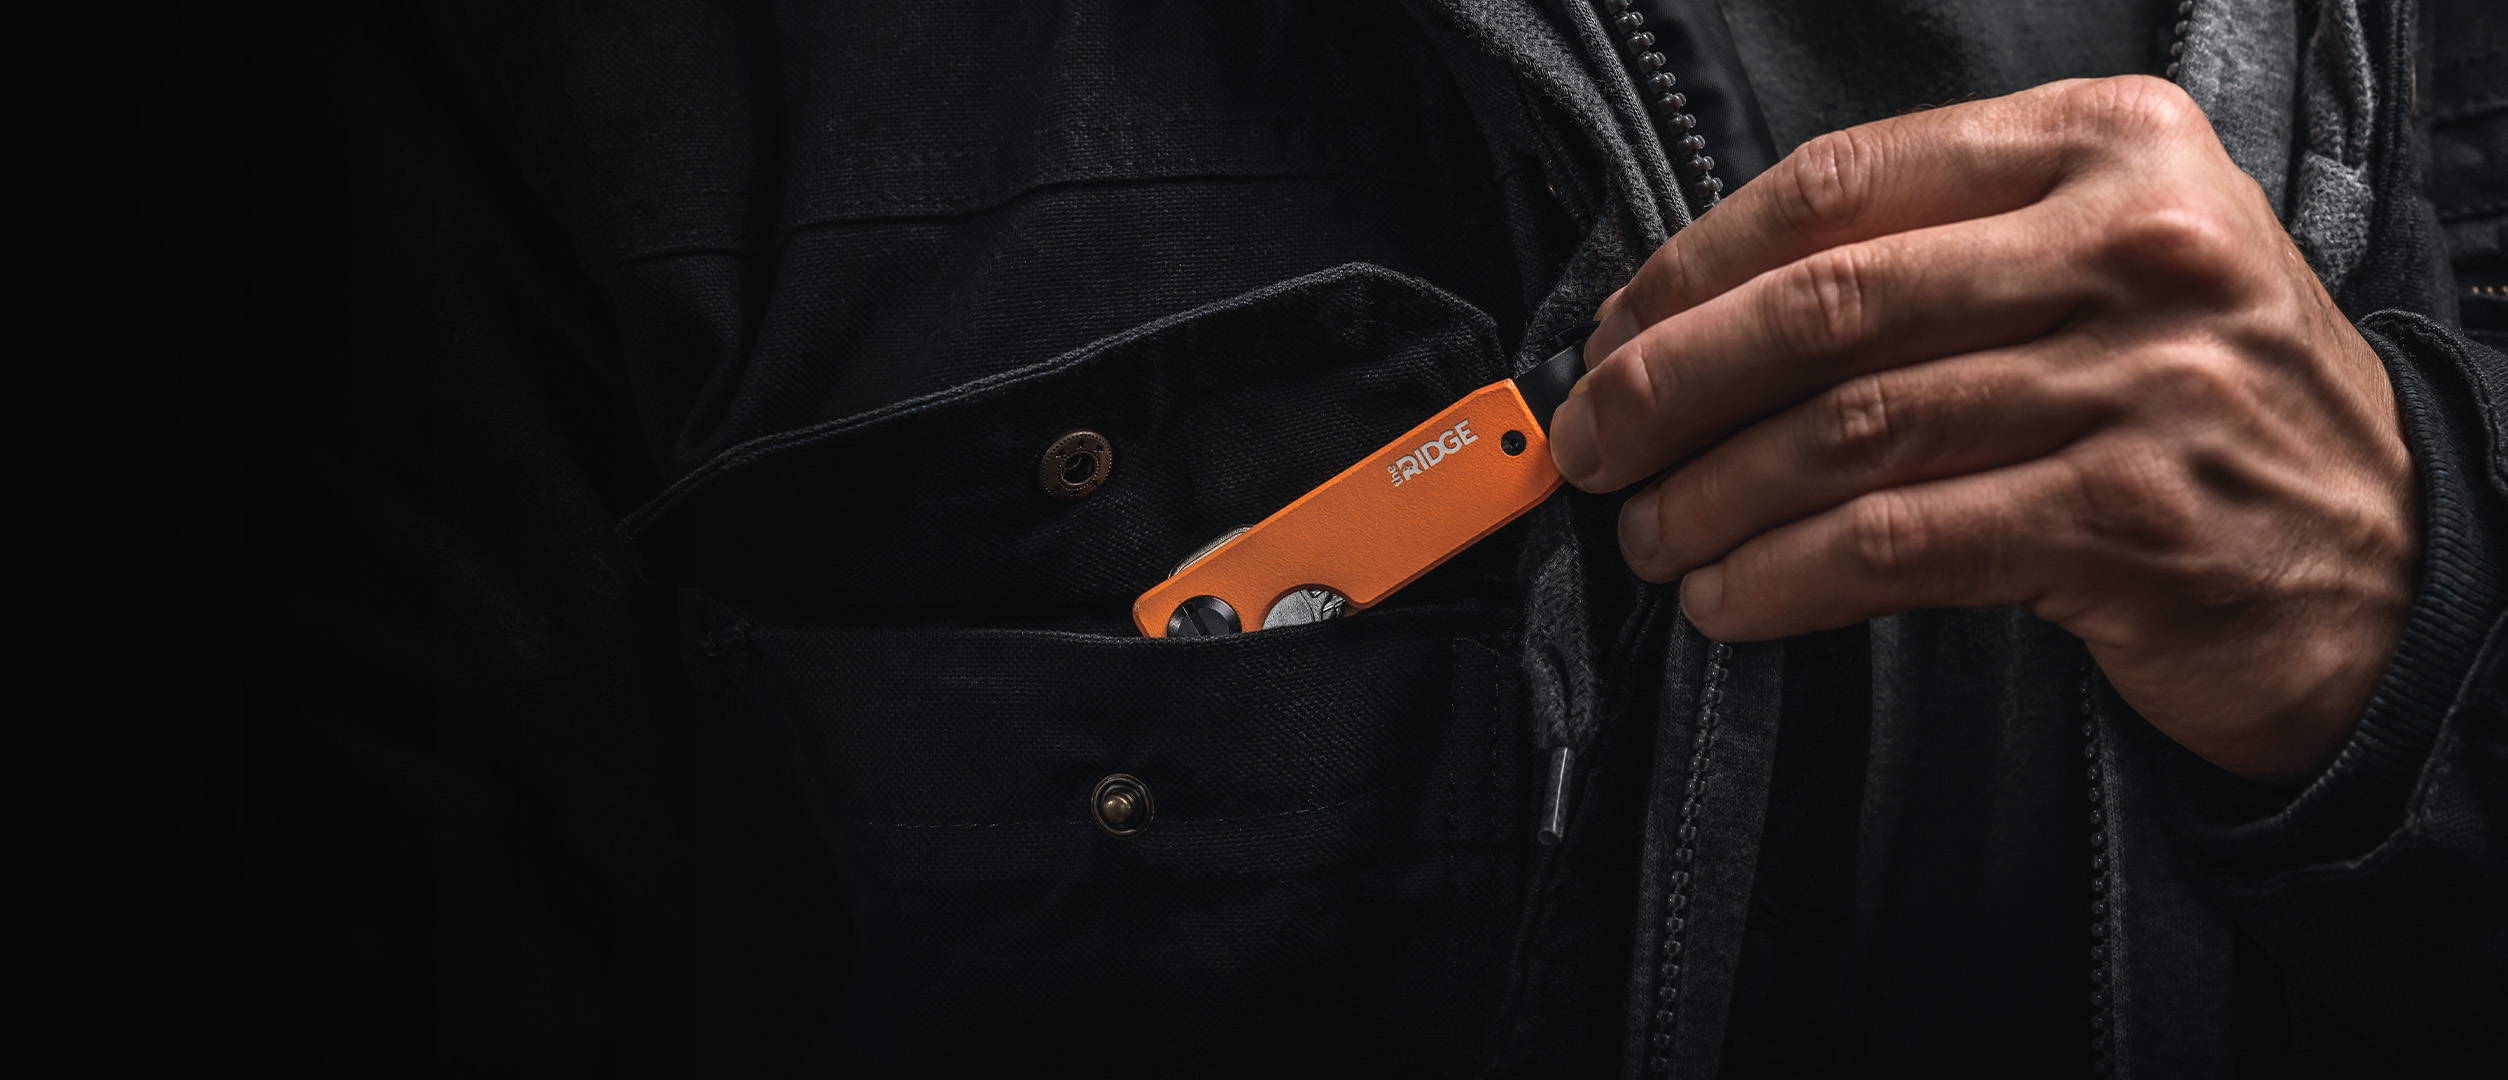 Basecamp Orange Ridge keycase pulled out from chest pocket